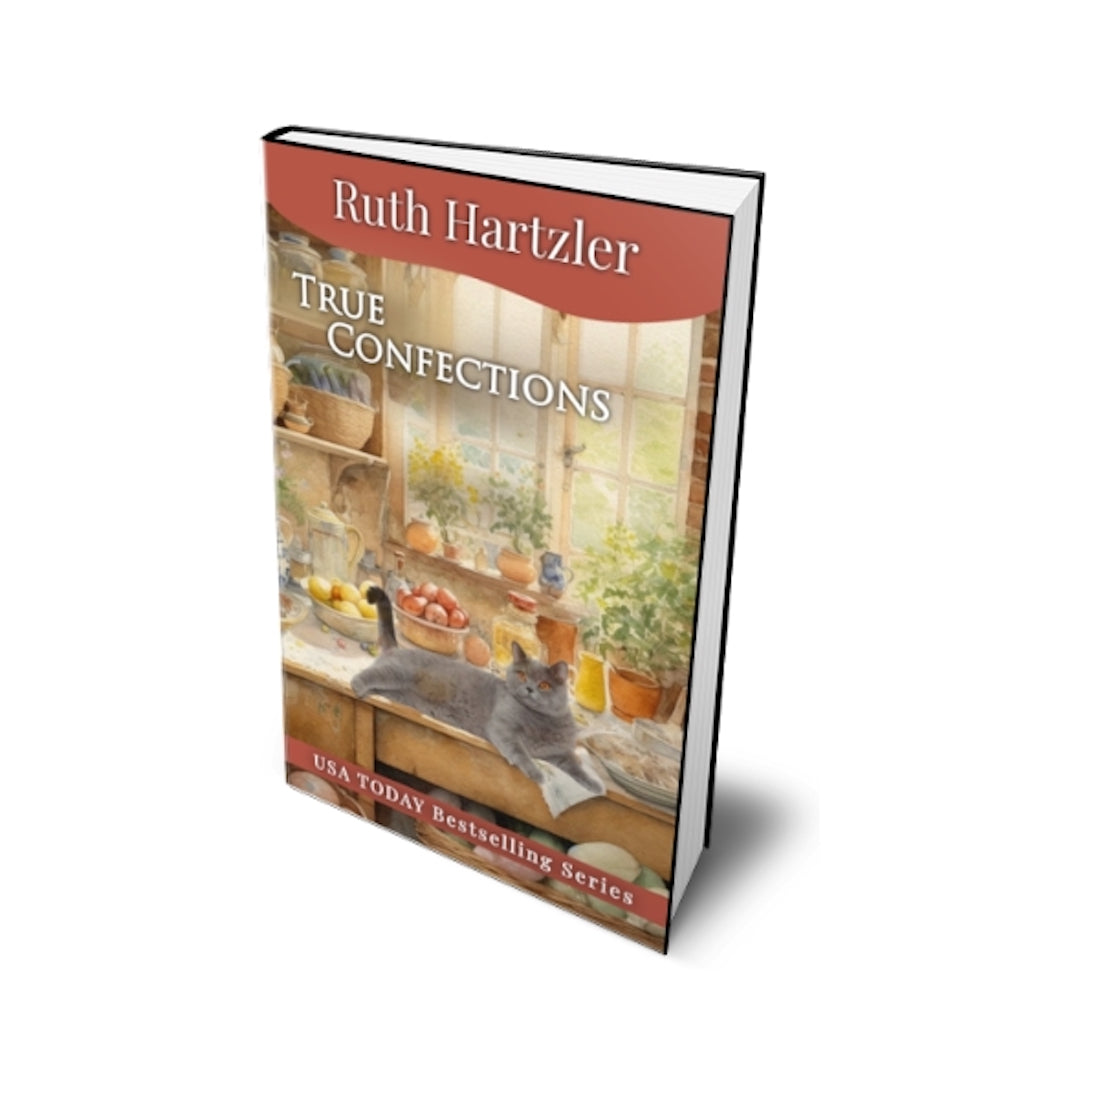 True Confections PAPERBACK cozy mystery RUTH HARTZLER